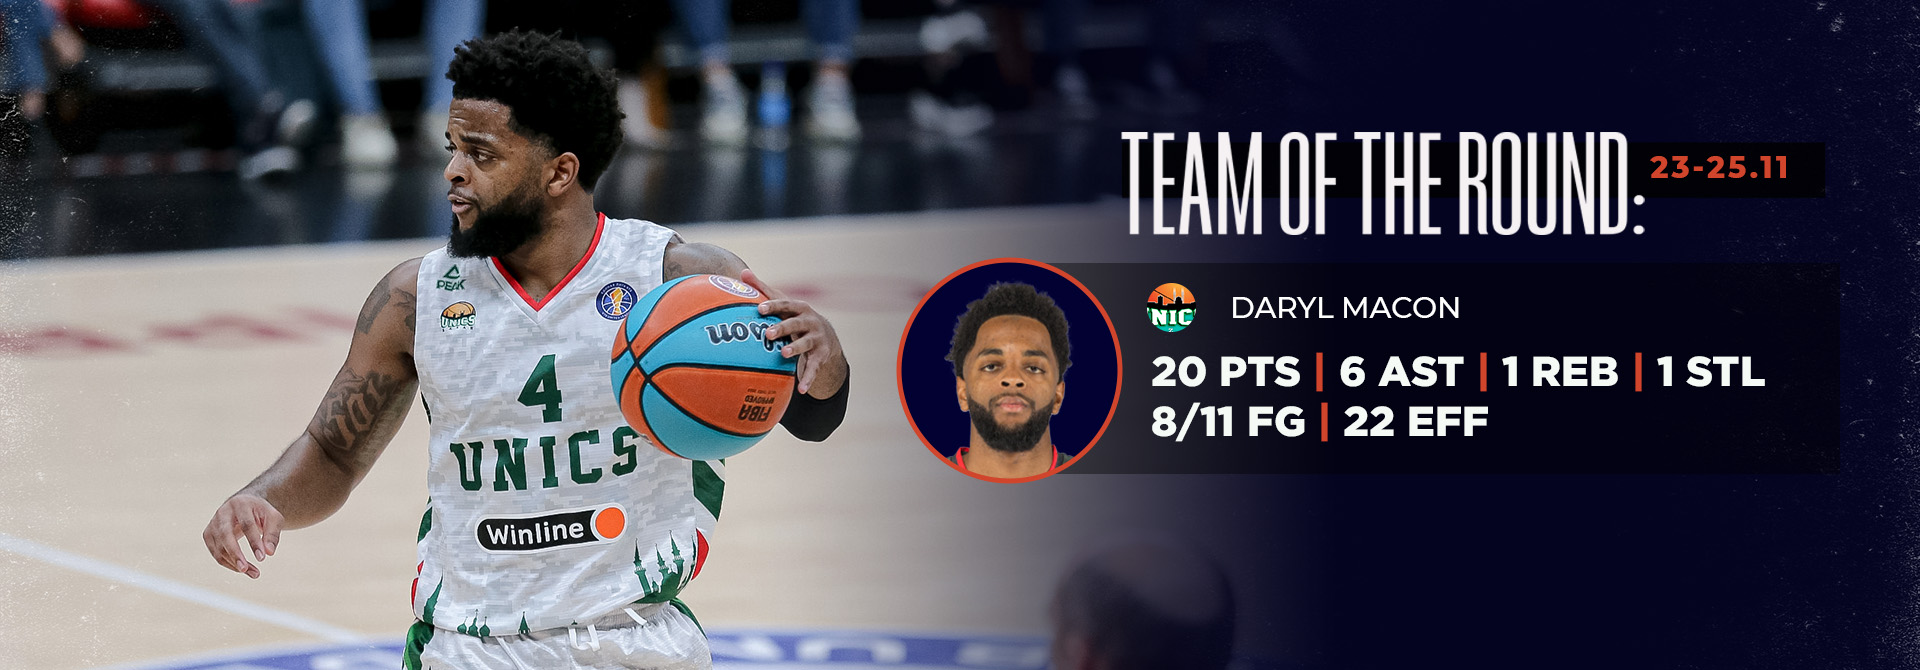 Daryl Macon was included in the All-VTB United League Team of the week!